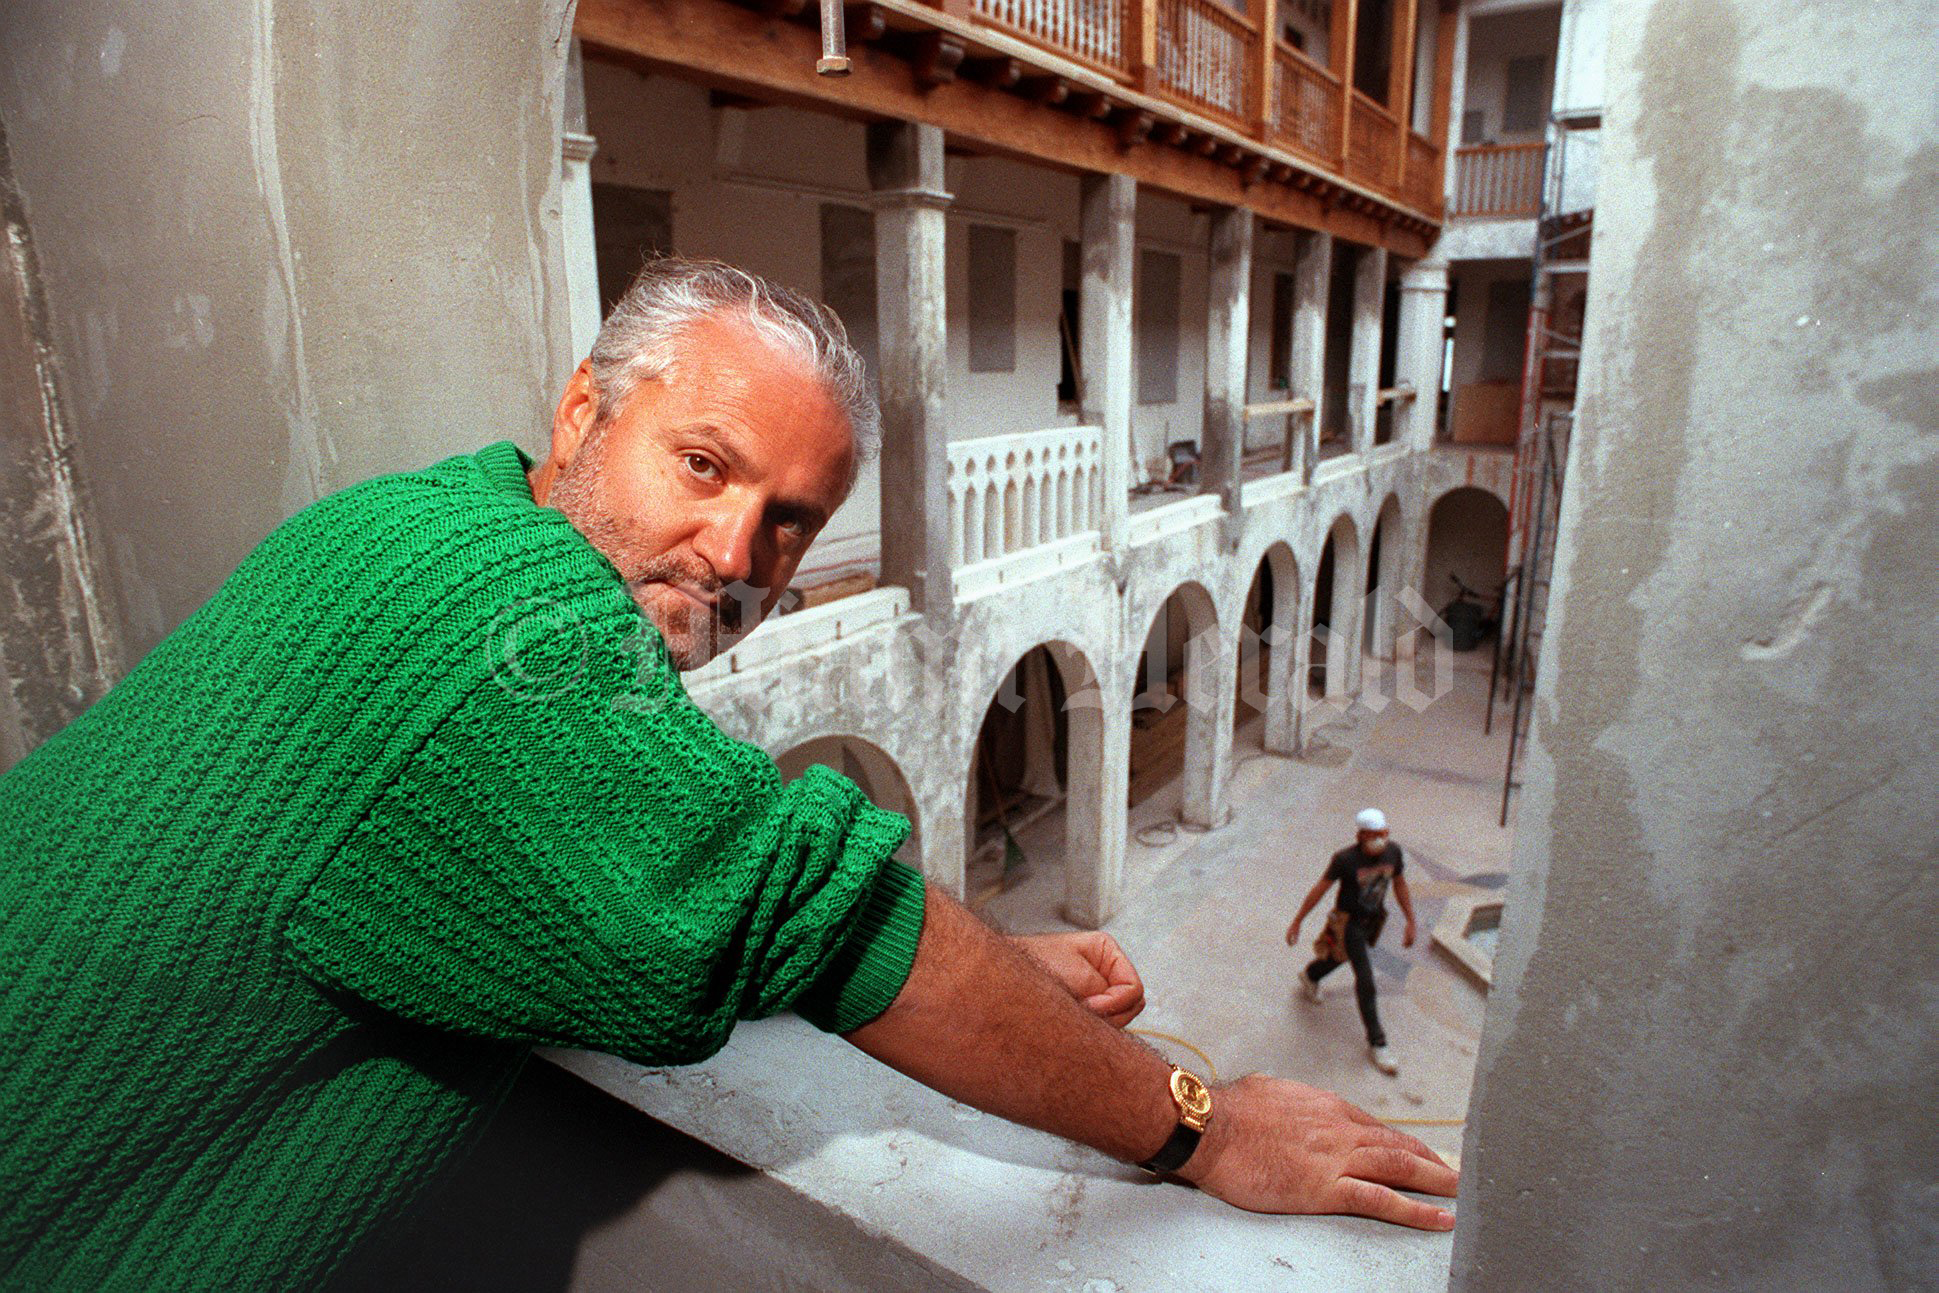 3/16/93,  Gianni Versace looking out from a second story window overlooking his patio. during the renovation works of his mansion.  Marice Cohn Band/Miami Herald Staff-- (Permission to republish provided by the Miami Herald Media Co.)